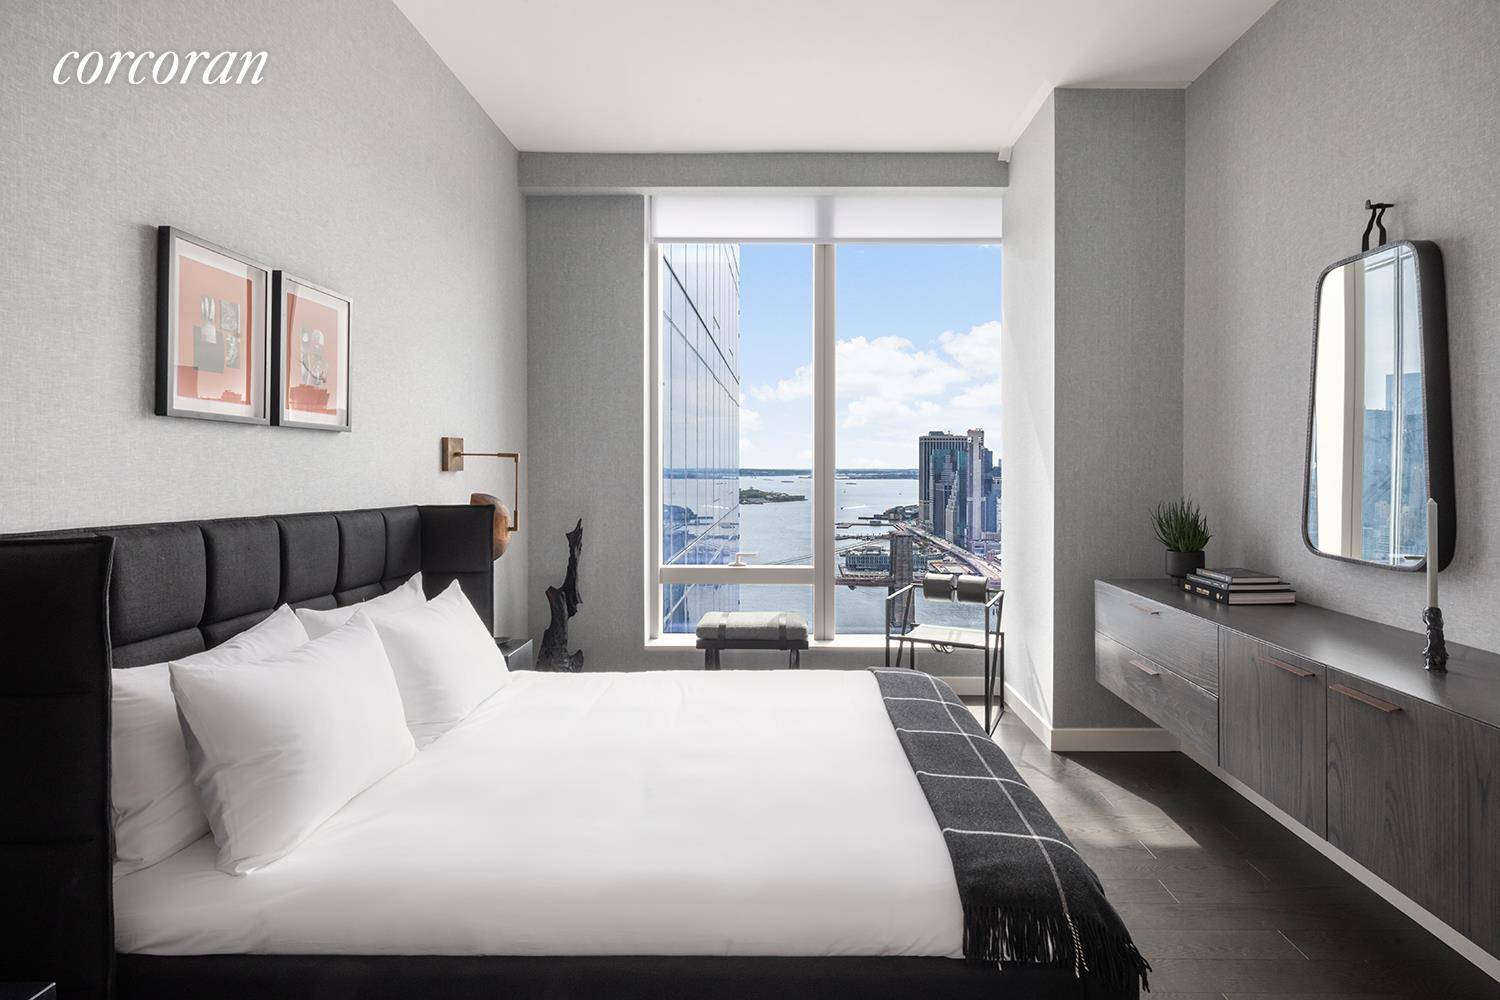 ONE MANHATTAN SQUARE OFFERS ONE OF THE LAST 20 YEAR TAX ABATEMENTS AVAILABLE IN NEW YORK CITY Residence 57L is a 709 square foot one bedroom, one bathroom with an ...